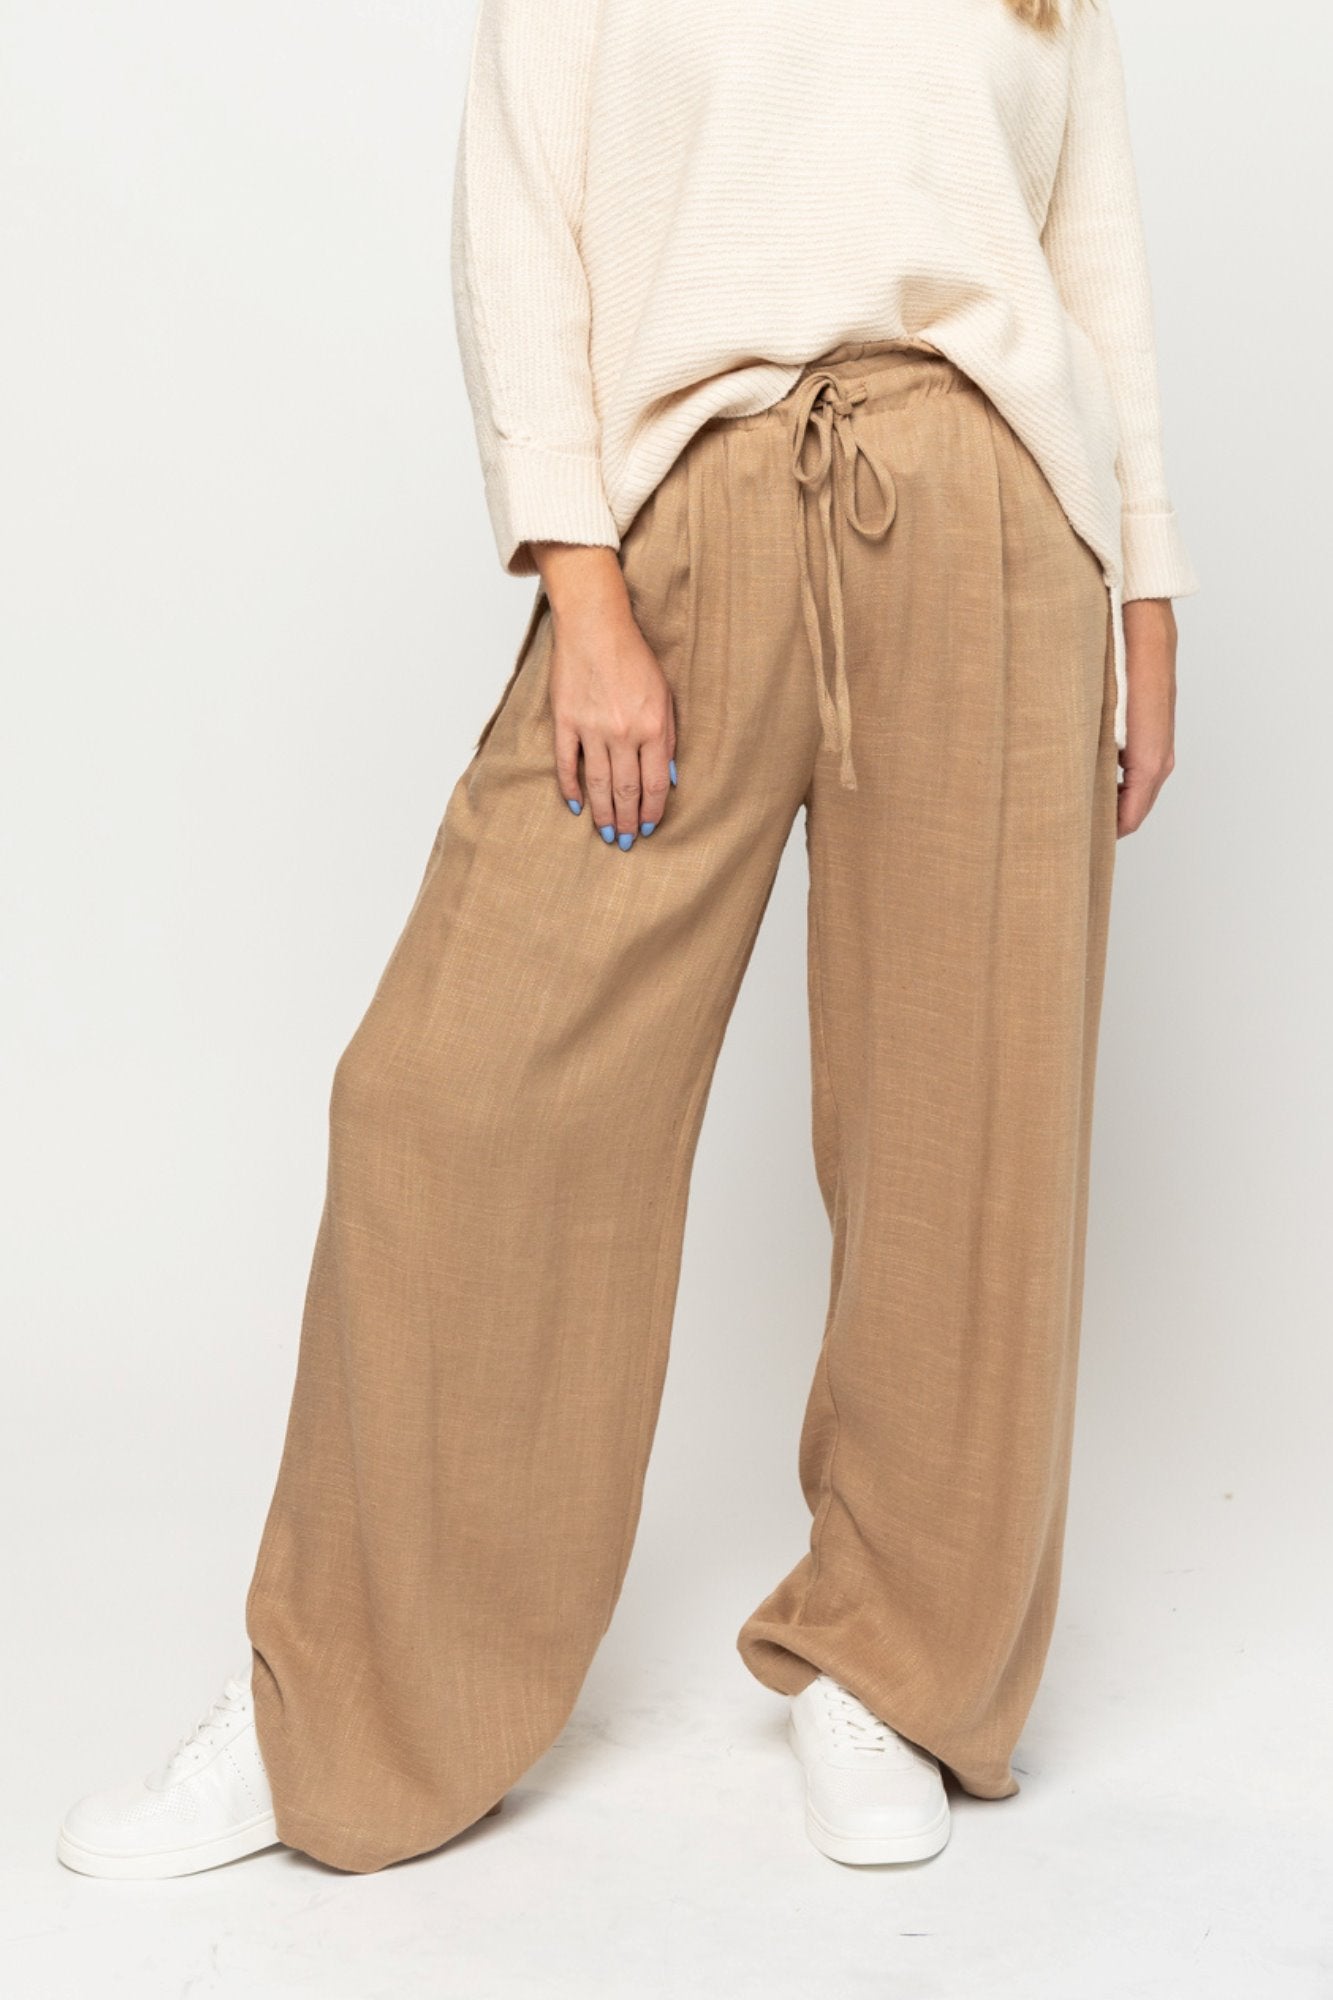 Darcy Pant in Mocha Holley Girl 